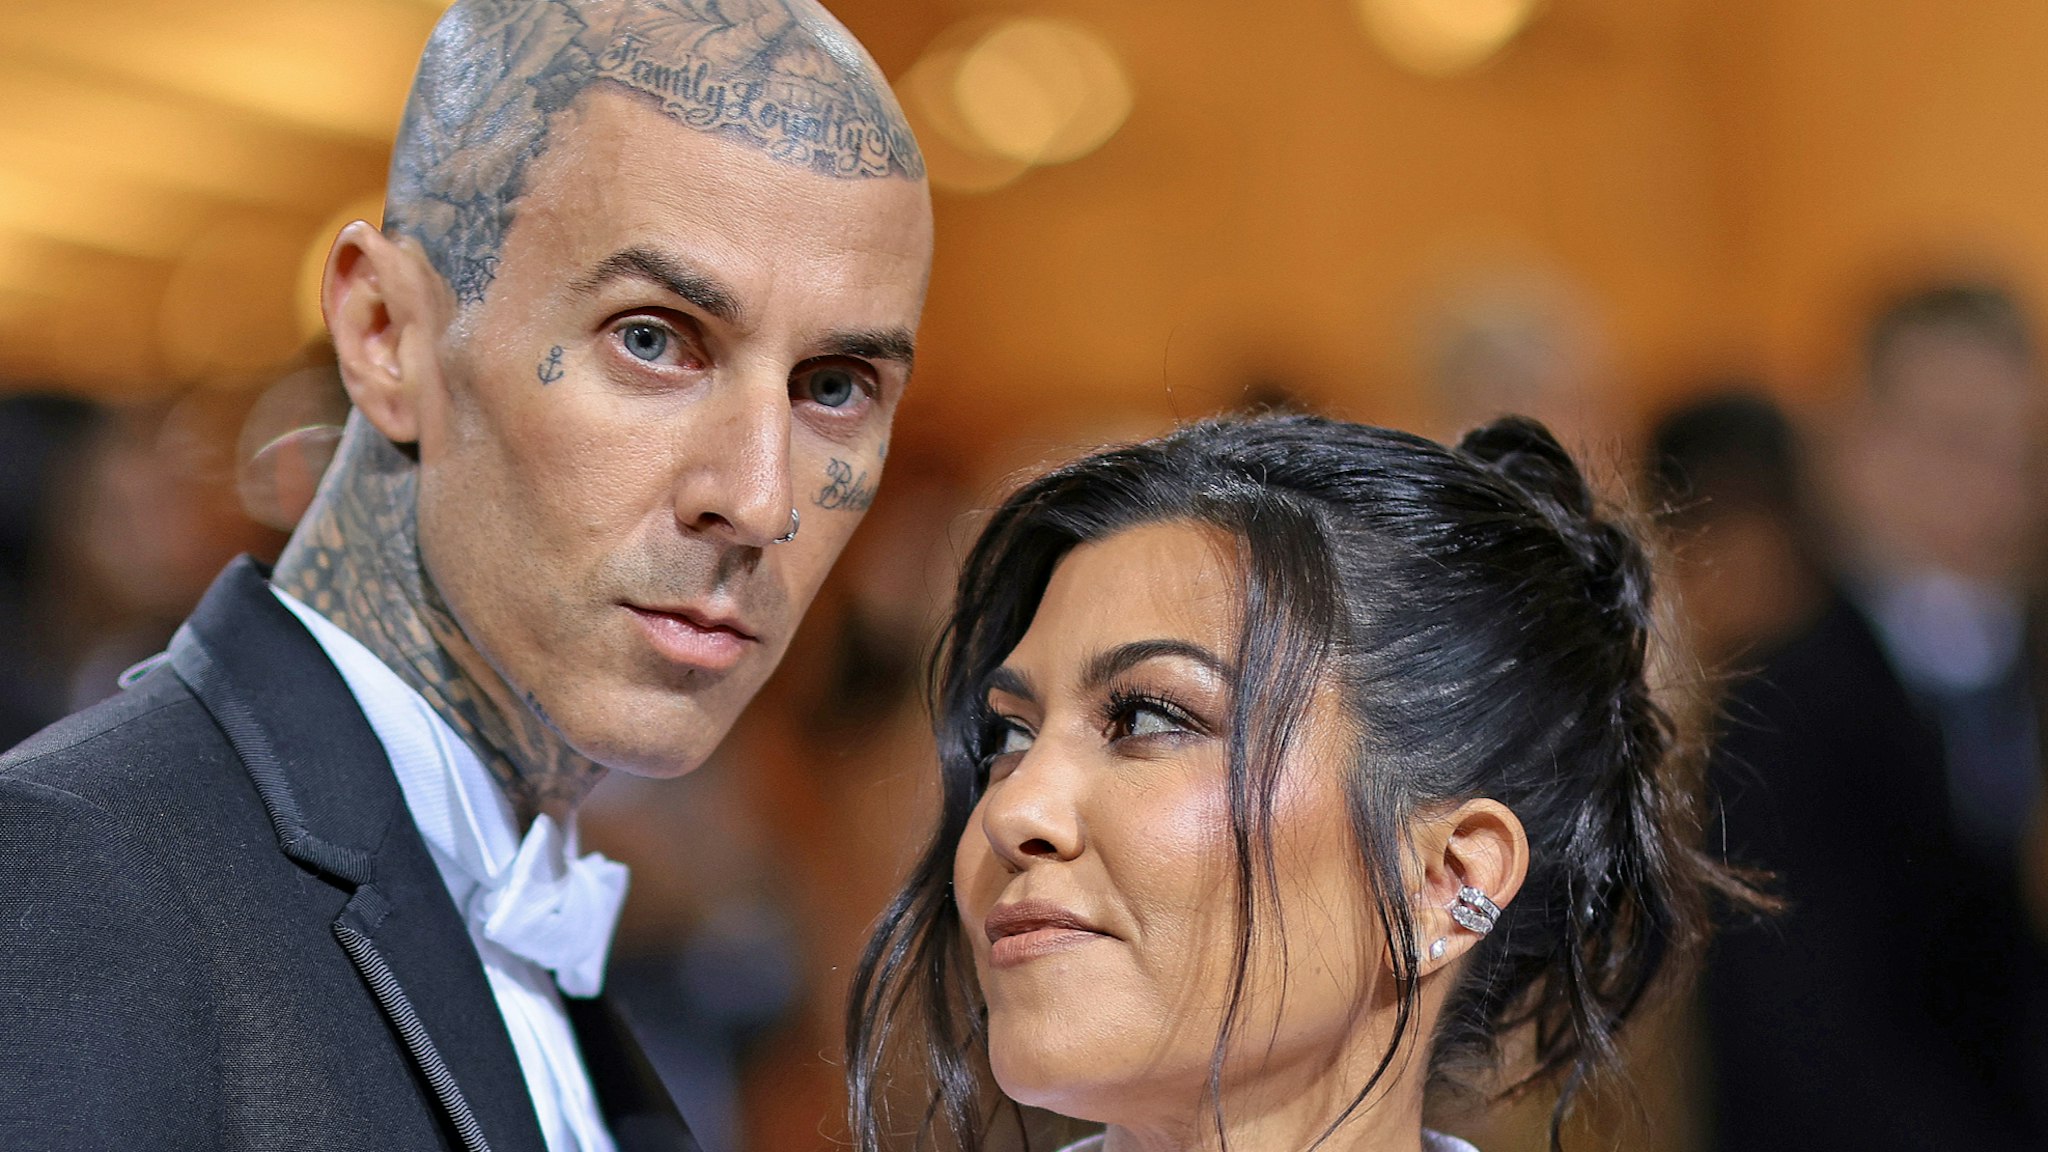 Travis Barker and Kourtney Kardashian attend The 2022 Met Gala Celebrating "In America: An Anthology of Fashion" at The Metropolitan Museum of Art on May 02, 2022 in New York City.